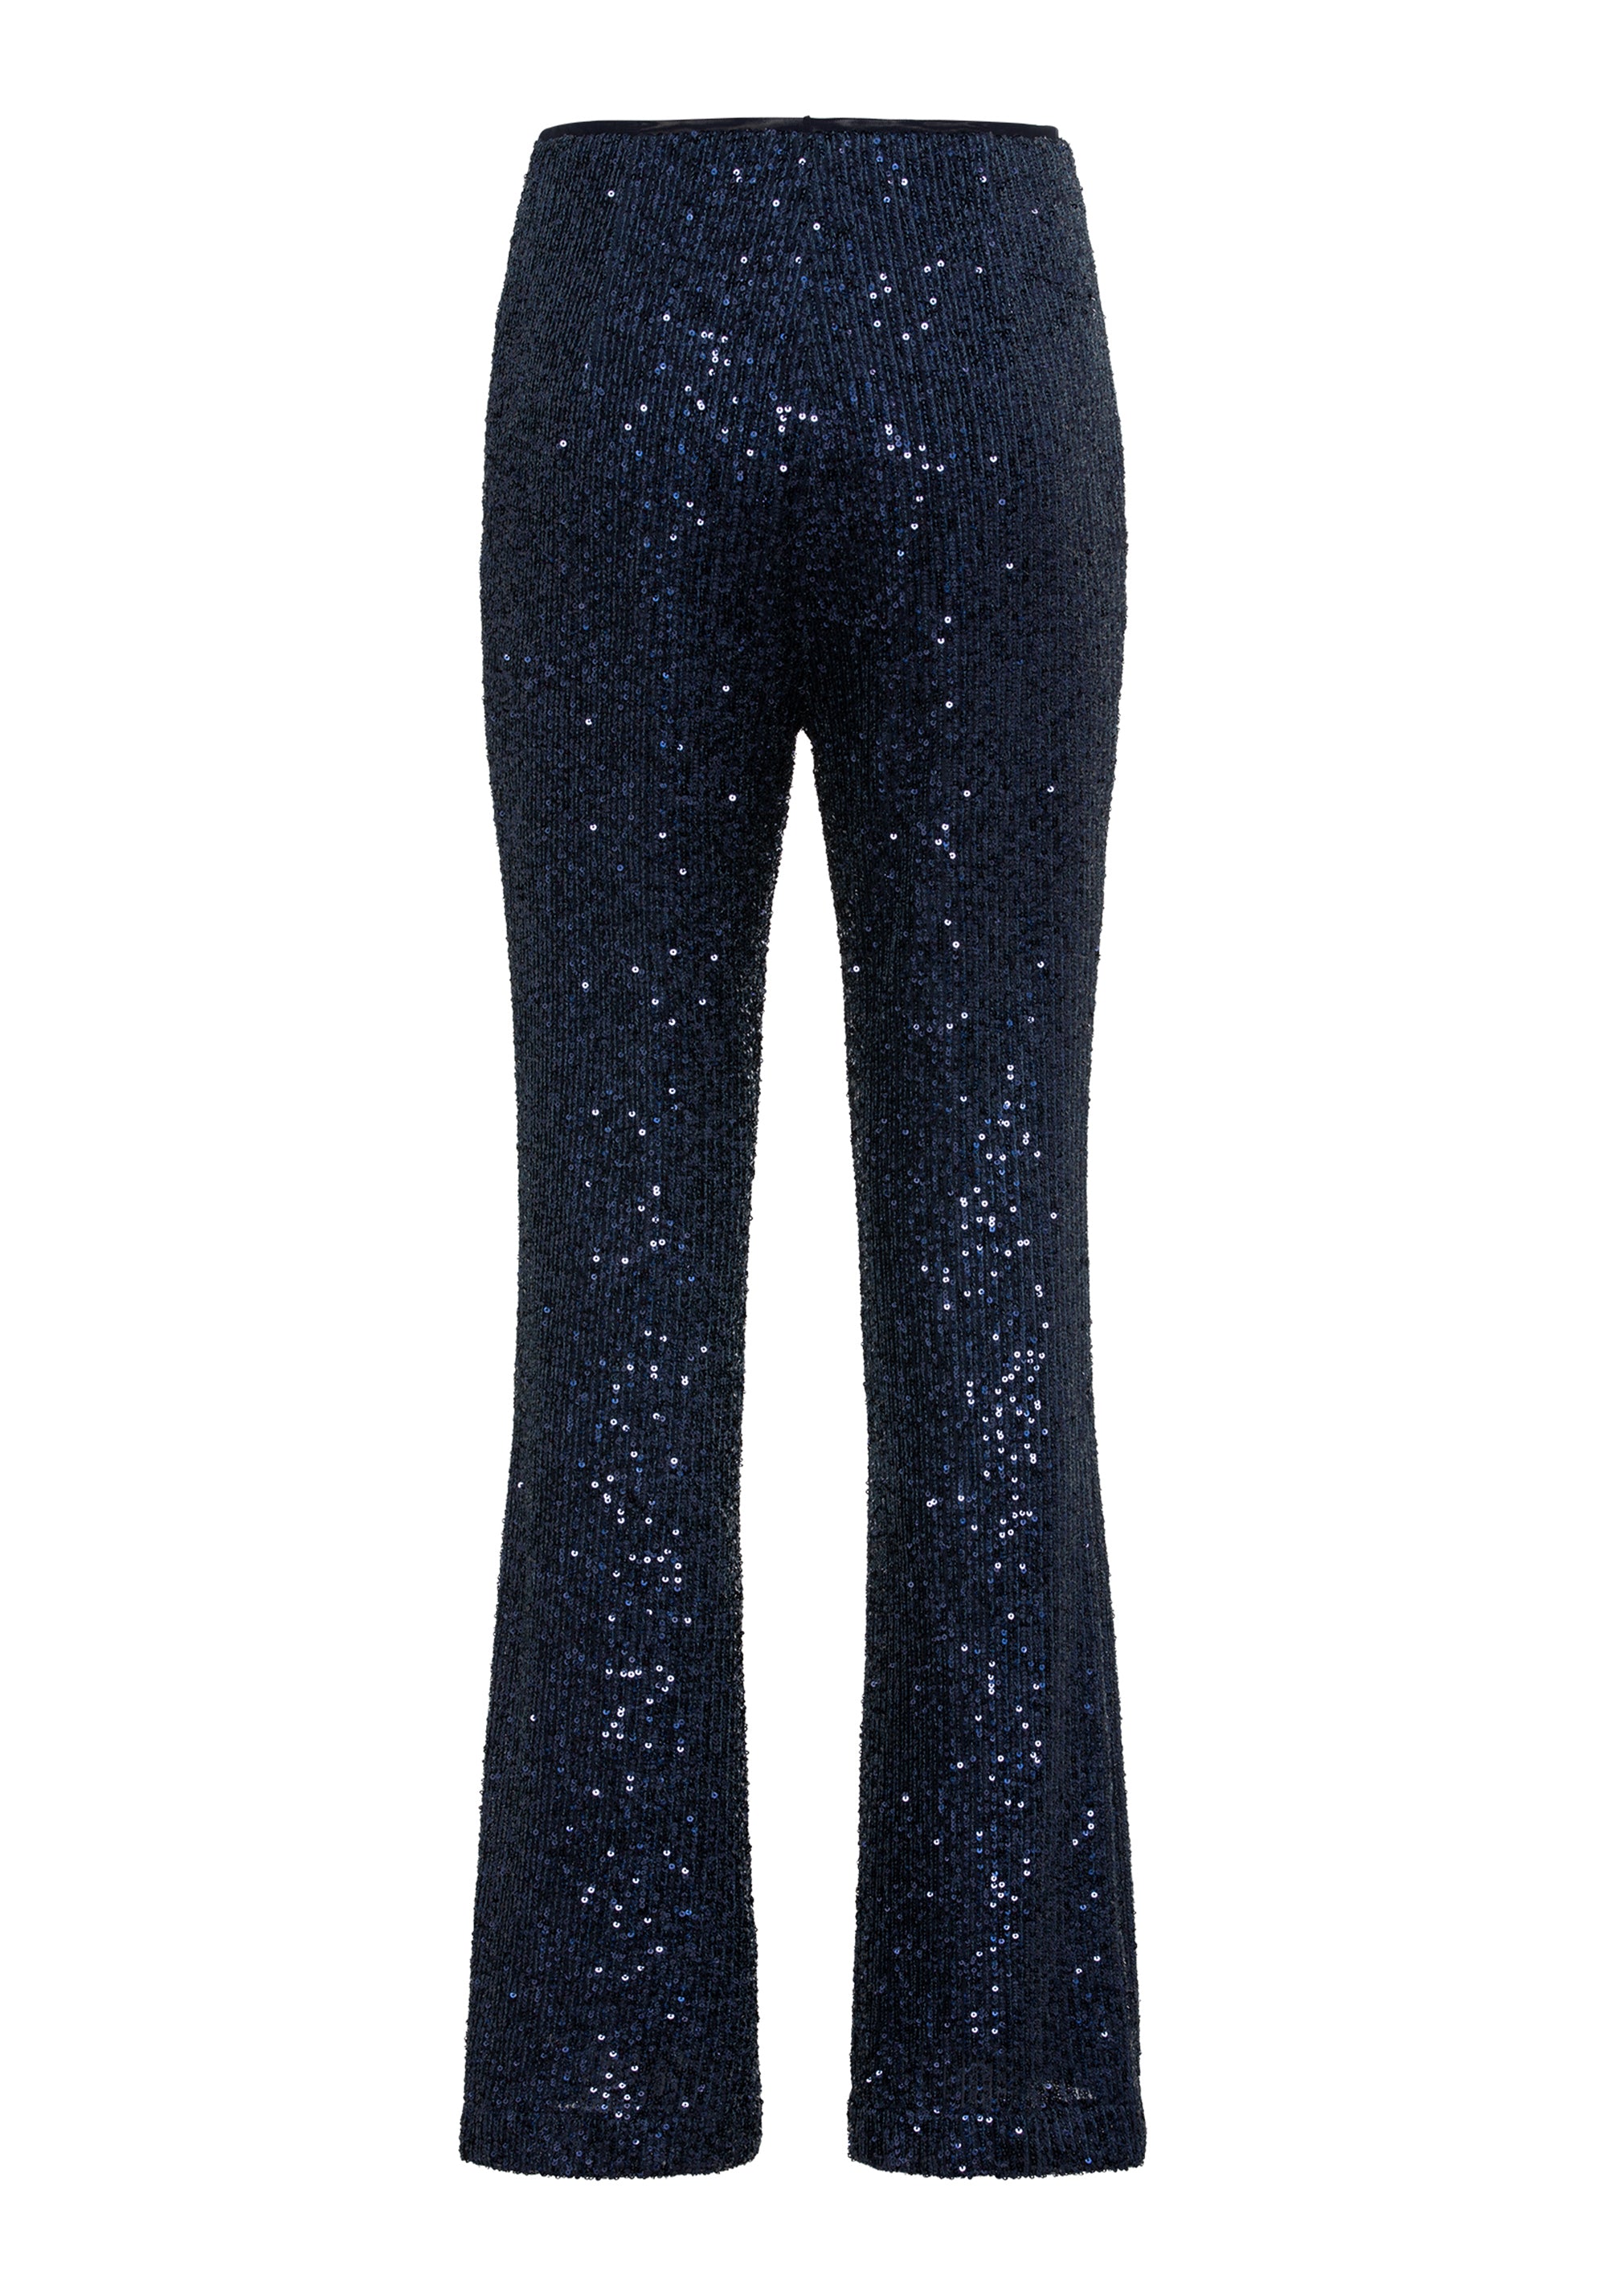 Mona Fit Bootcut Leg Allover Sequin Pull-On Pant - Olsen Fashion